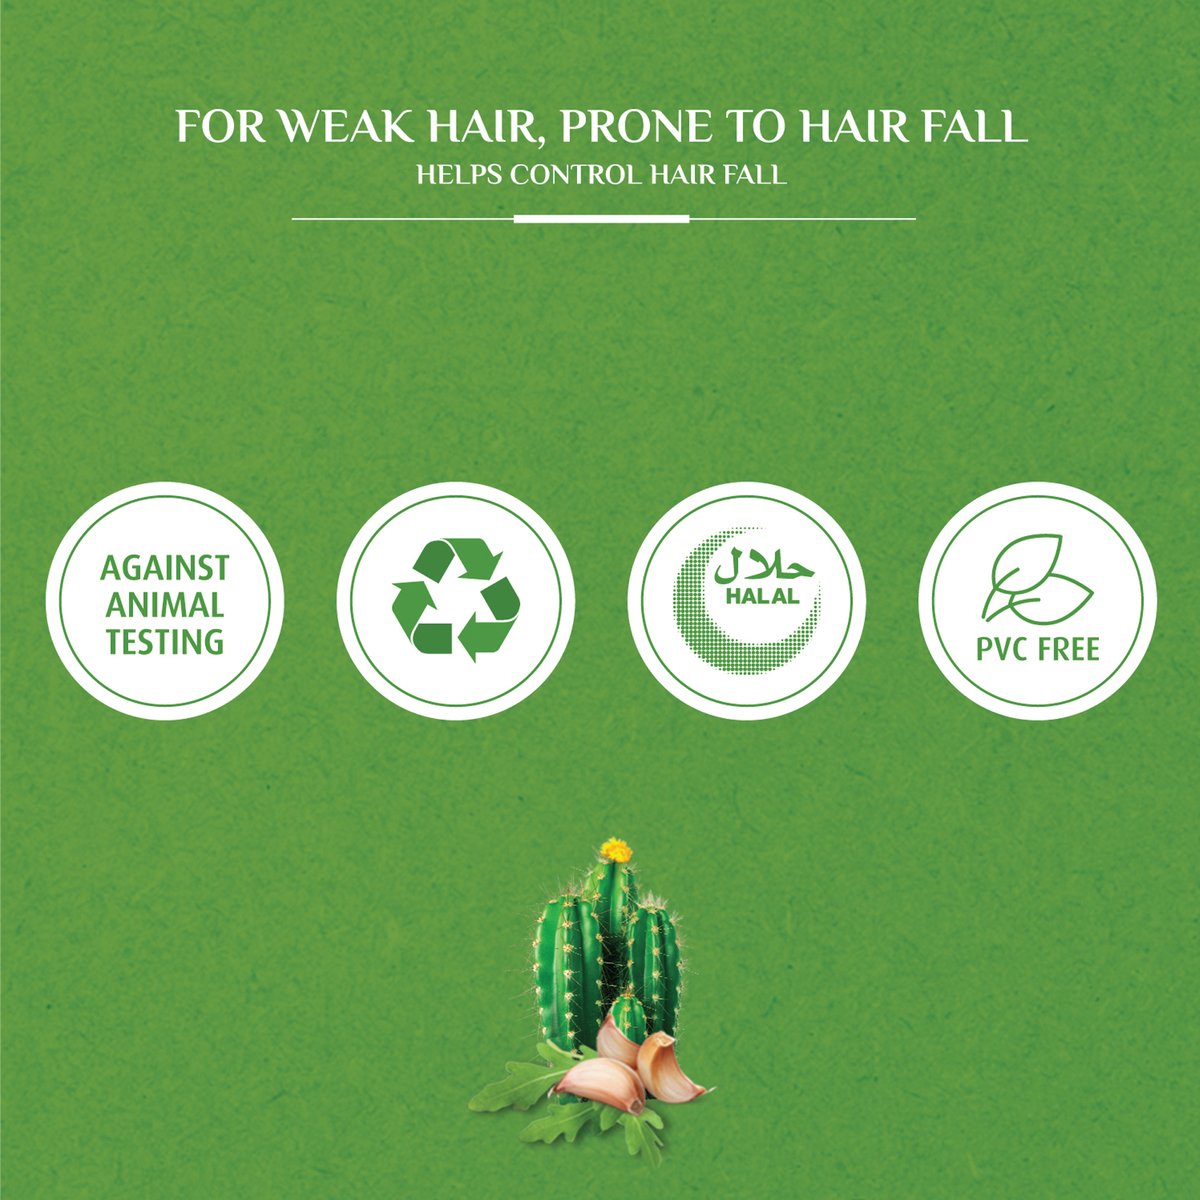 Vatika Naturals Hair Fall Control Shampoo Enriched with Garlic, Cactus & Gergir Extracts For Weak Hair Prone to Hair Fall With Nourishing Vatika Oils 400 ml + 200 ml